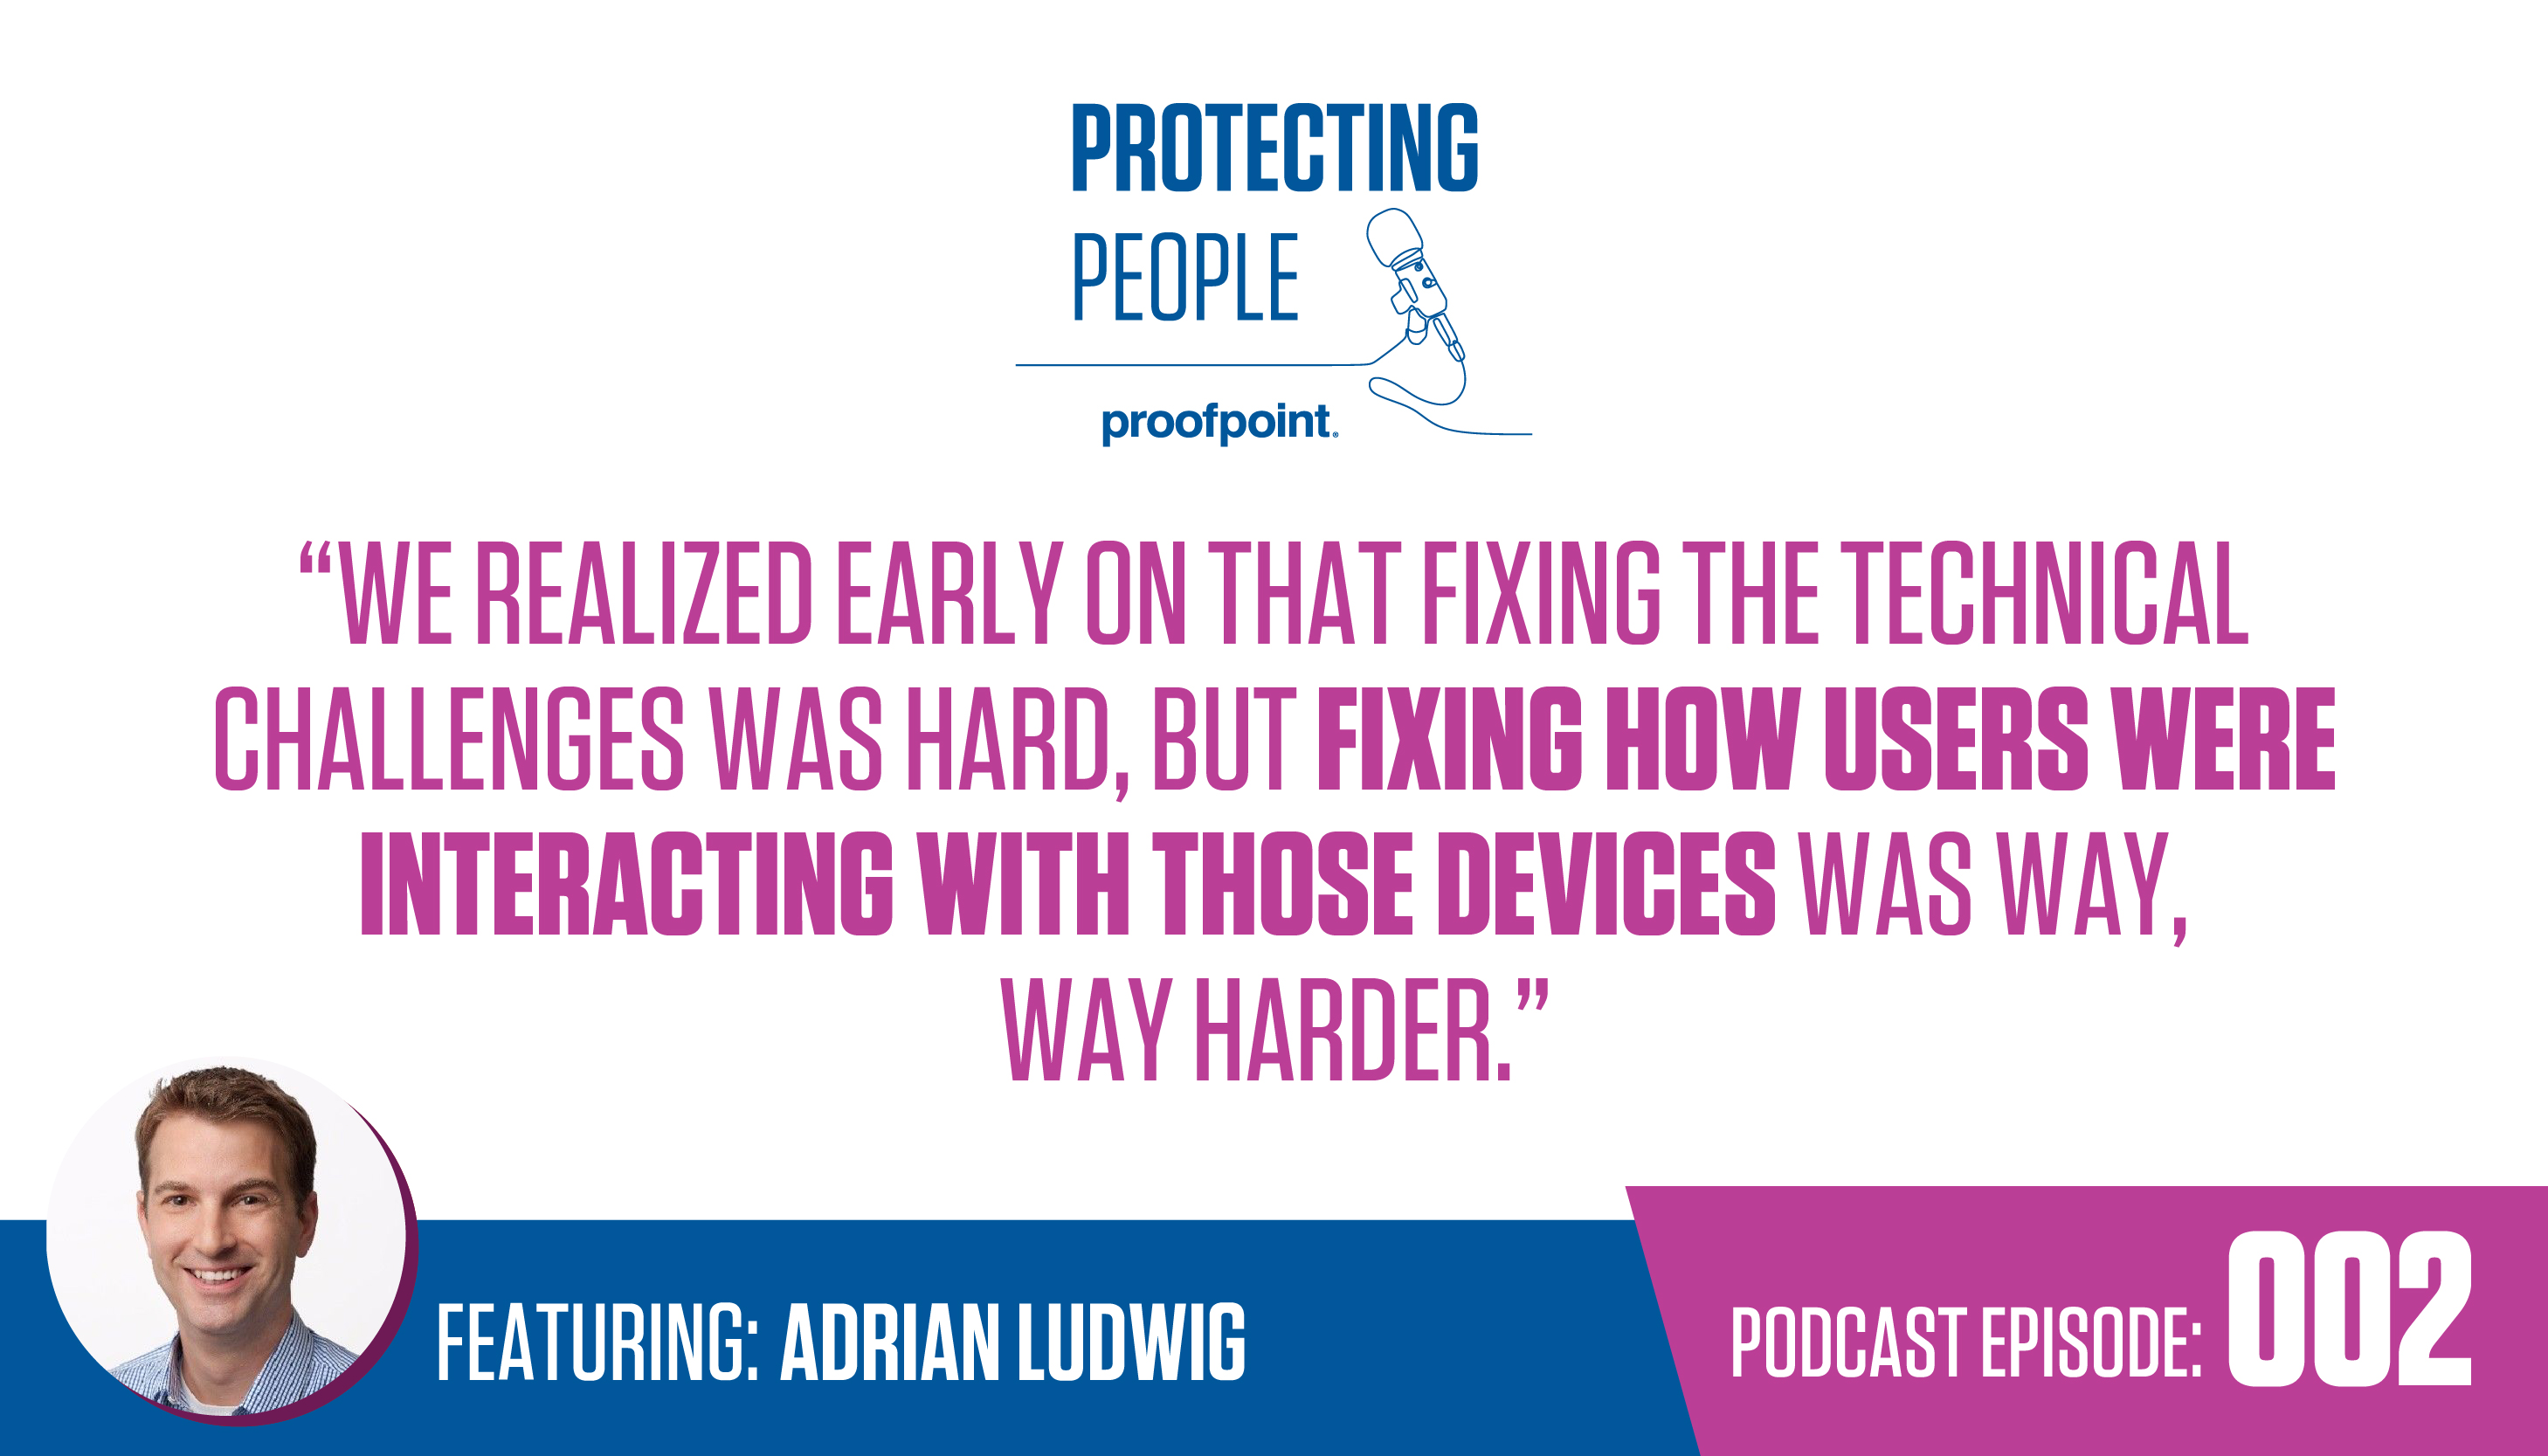 Protecting People podcast episode featuring Adrian Ludwig